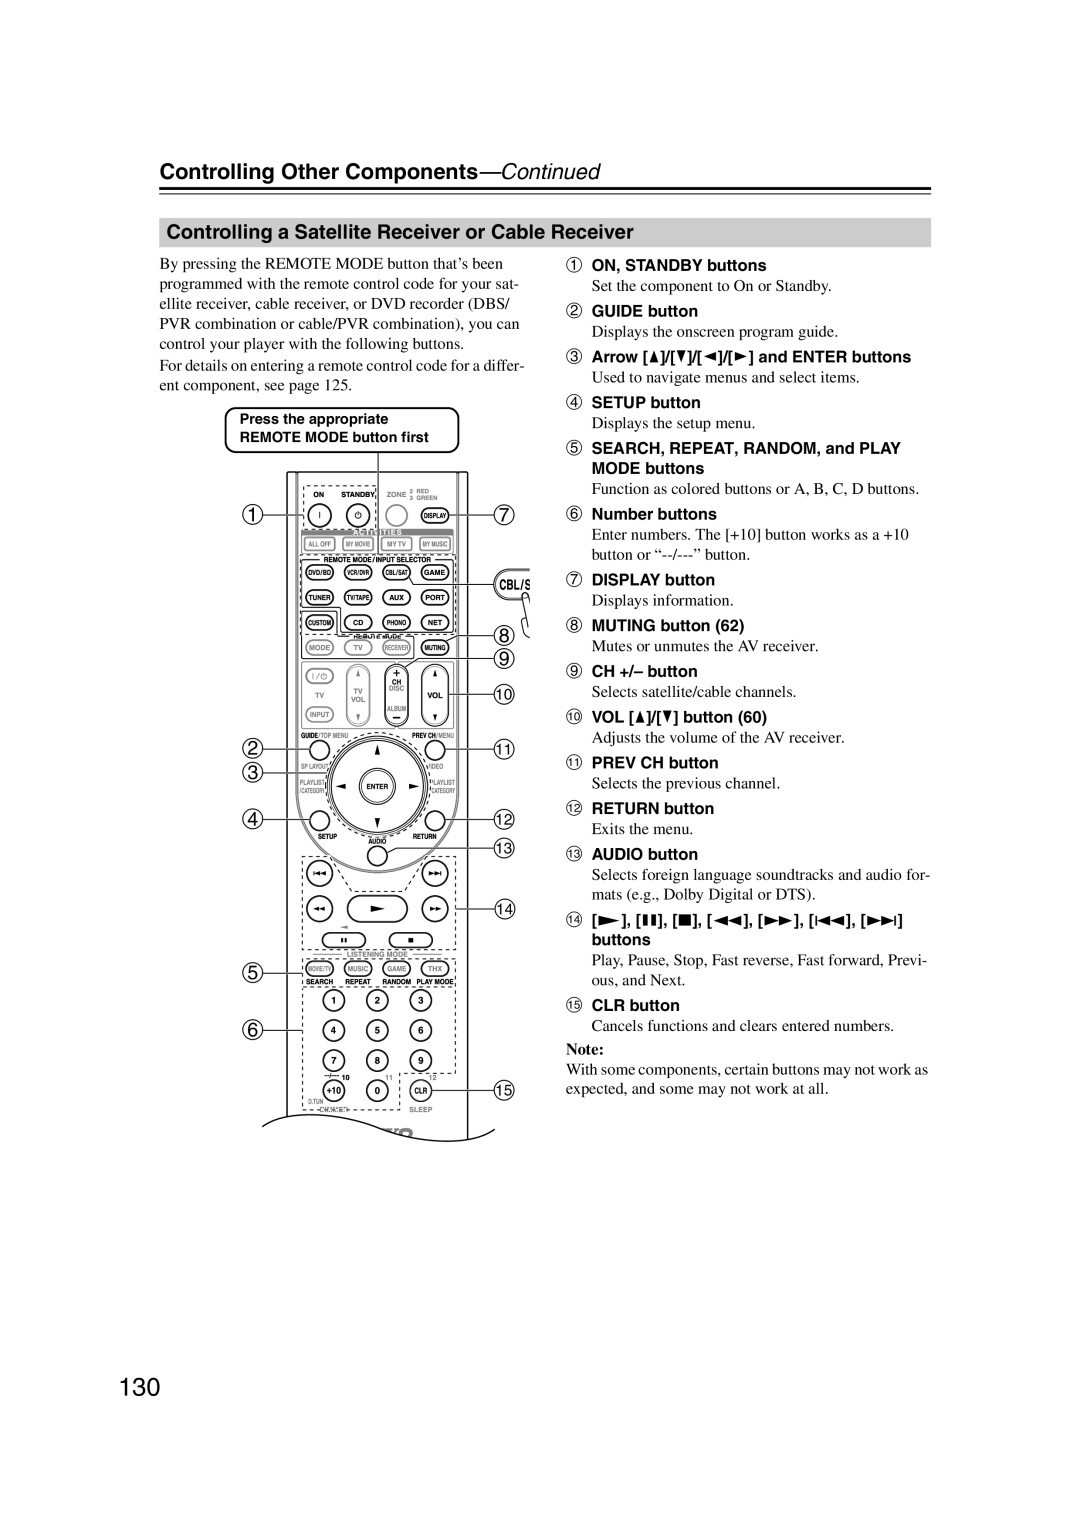 Onkyo HT-RC180, 29400021, TX-NR807 instruction manual h i j bk c dl m n, Controlling Other Components—Continued 